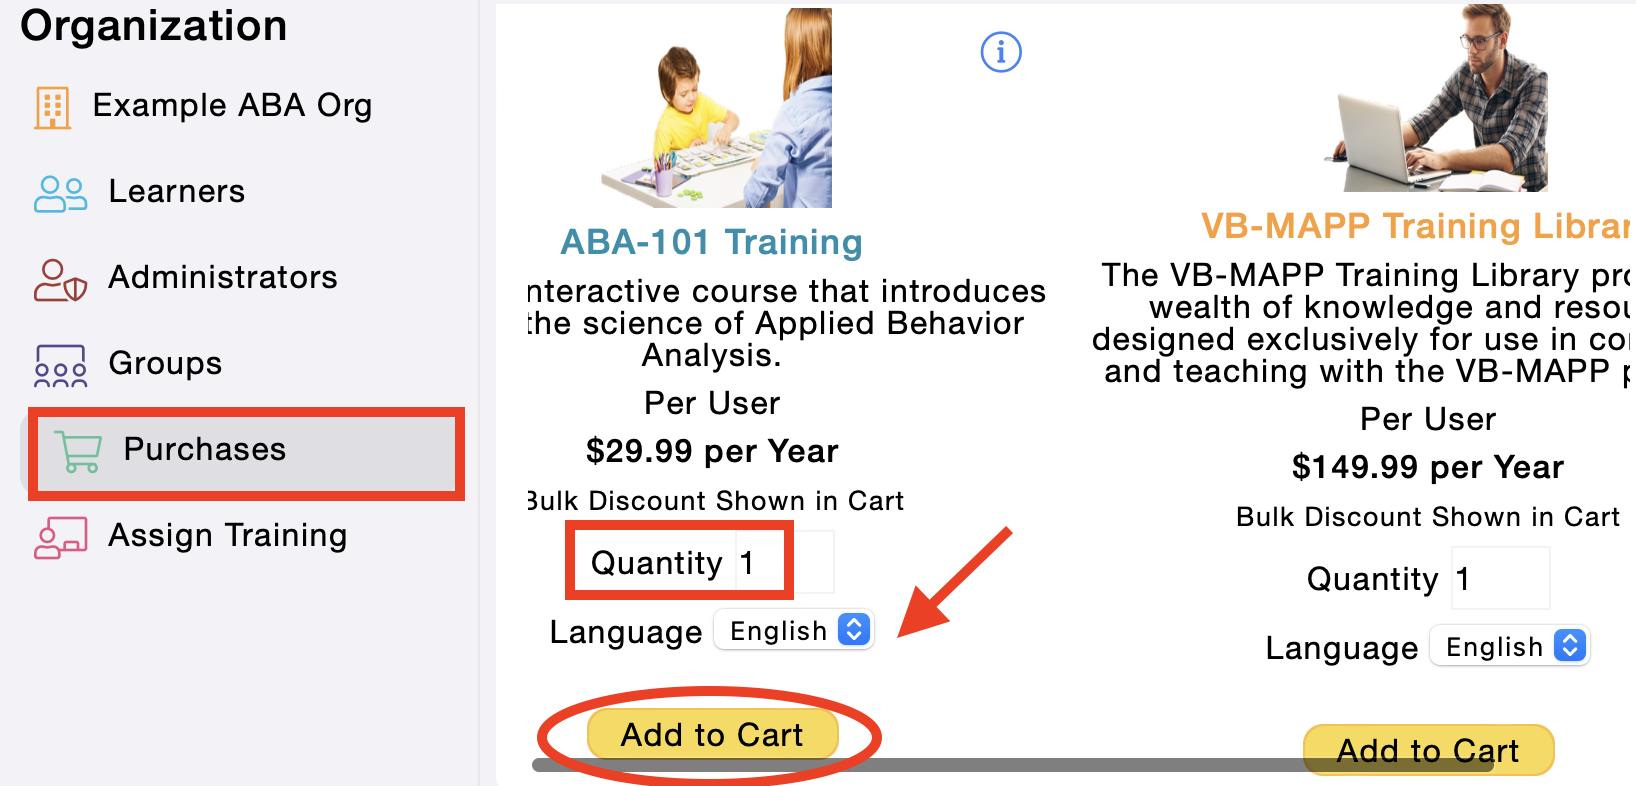 PURCHASE_Training_Web 2.png